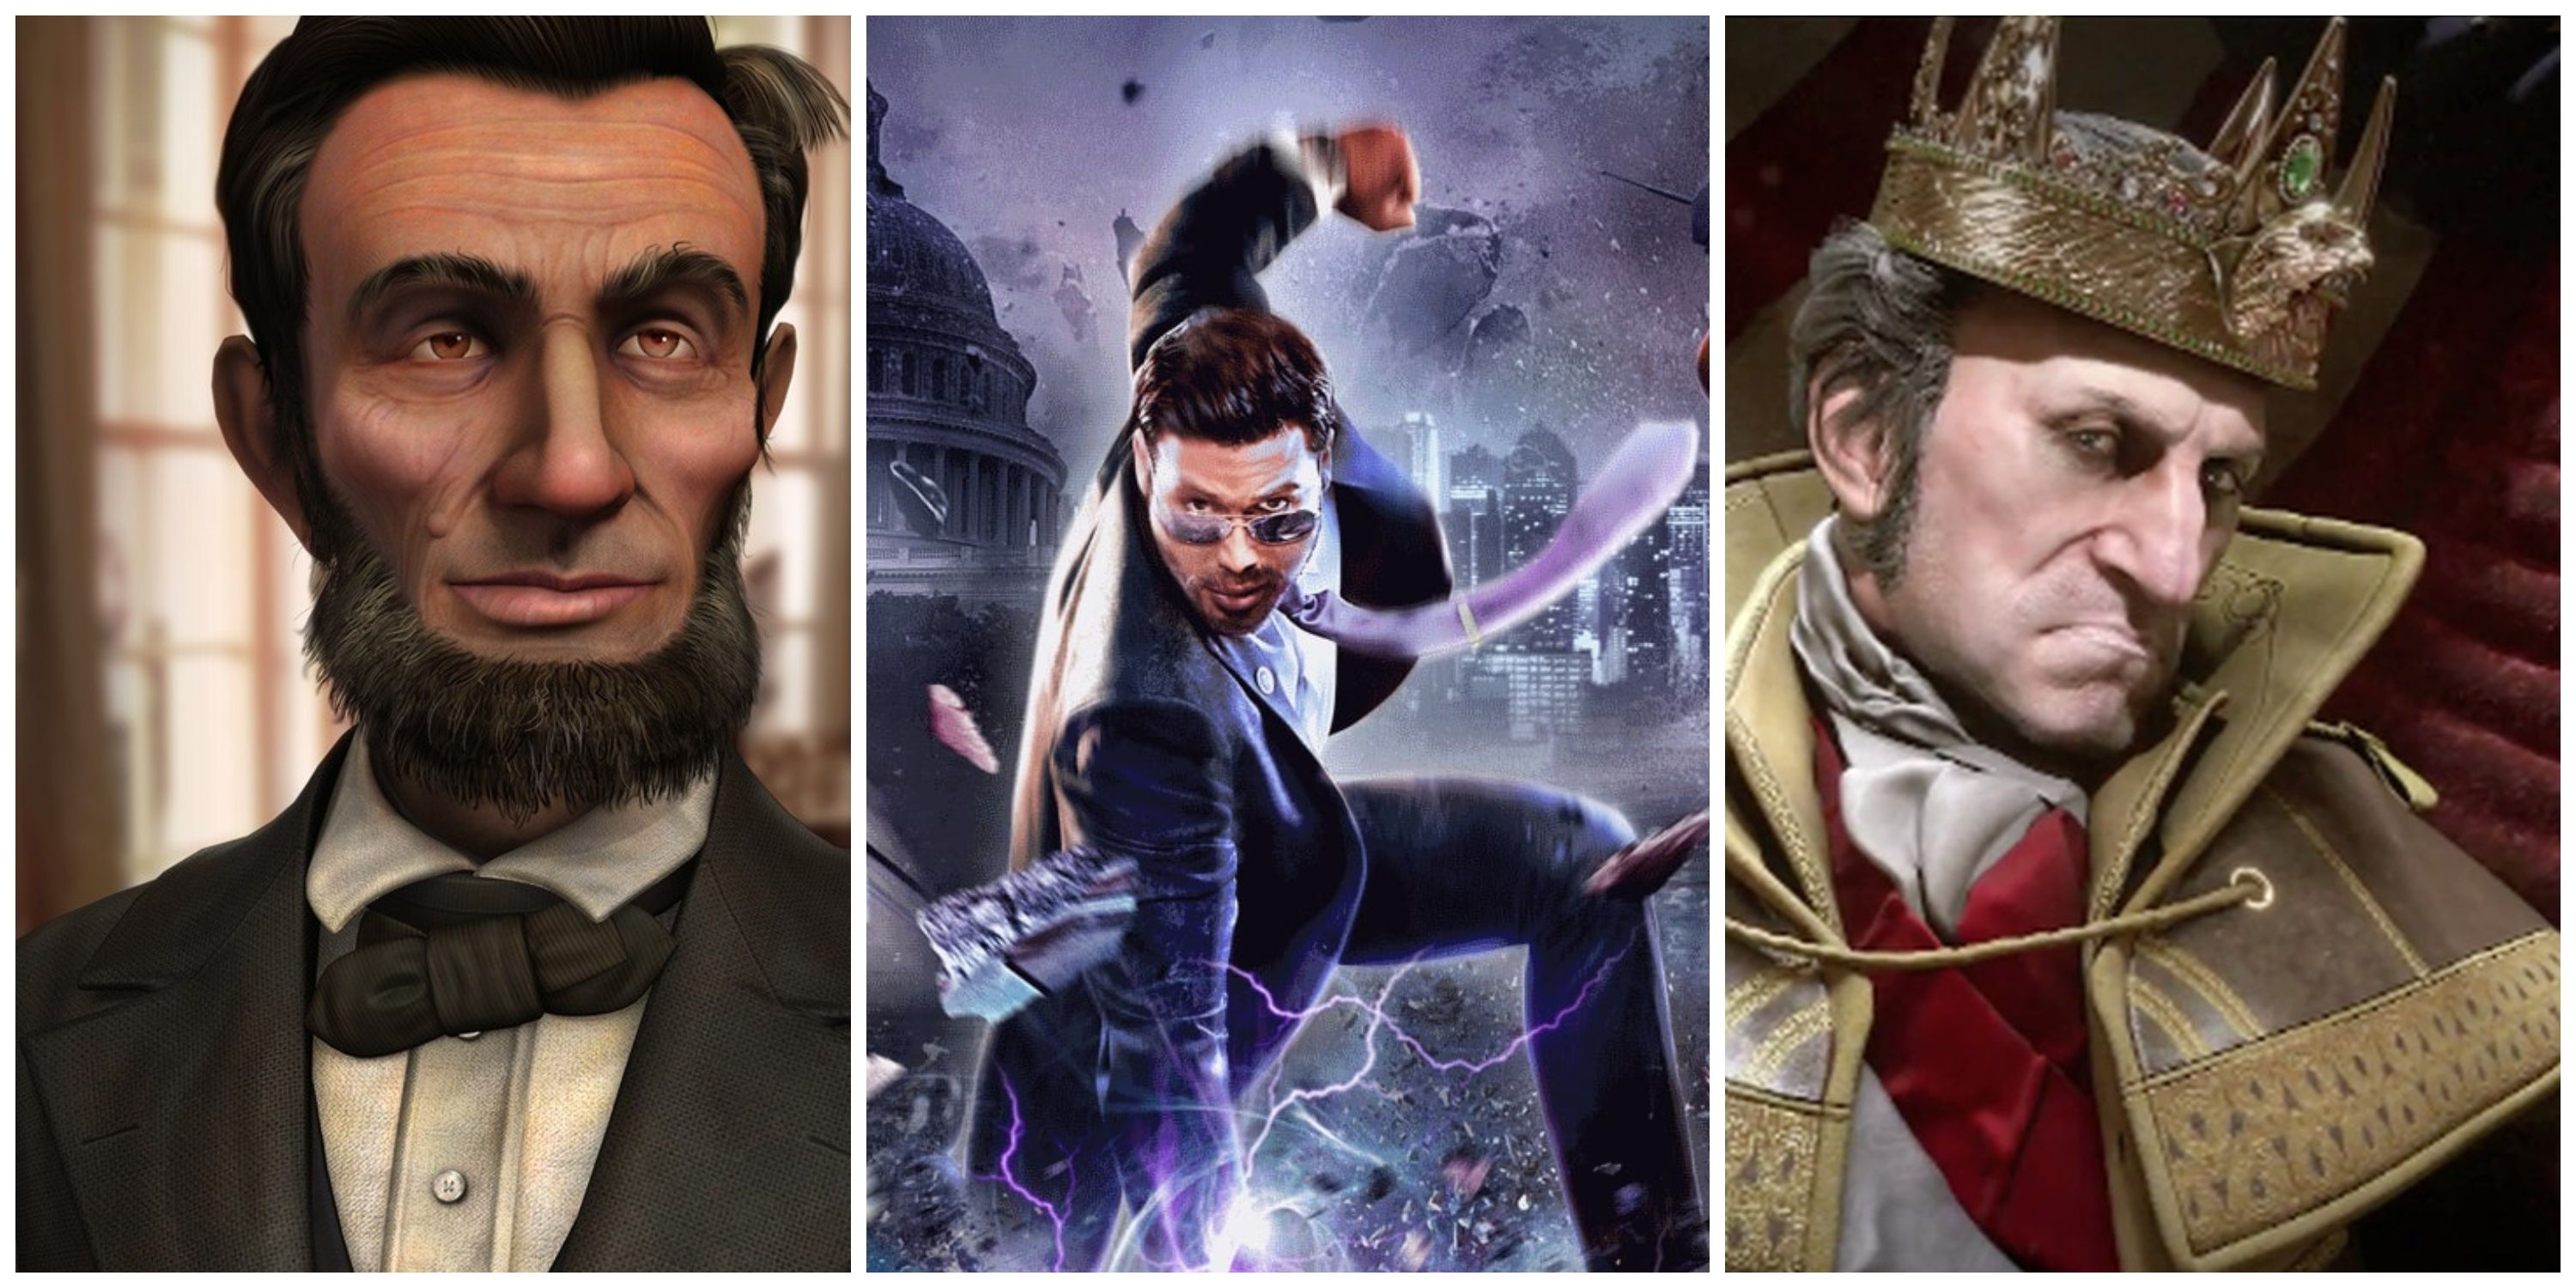 abraham lincoln in civ 4, the boss in saints row 4, king washington in assassin's creed 3 the tyranny of king washington